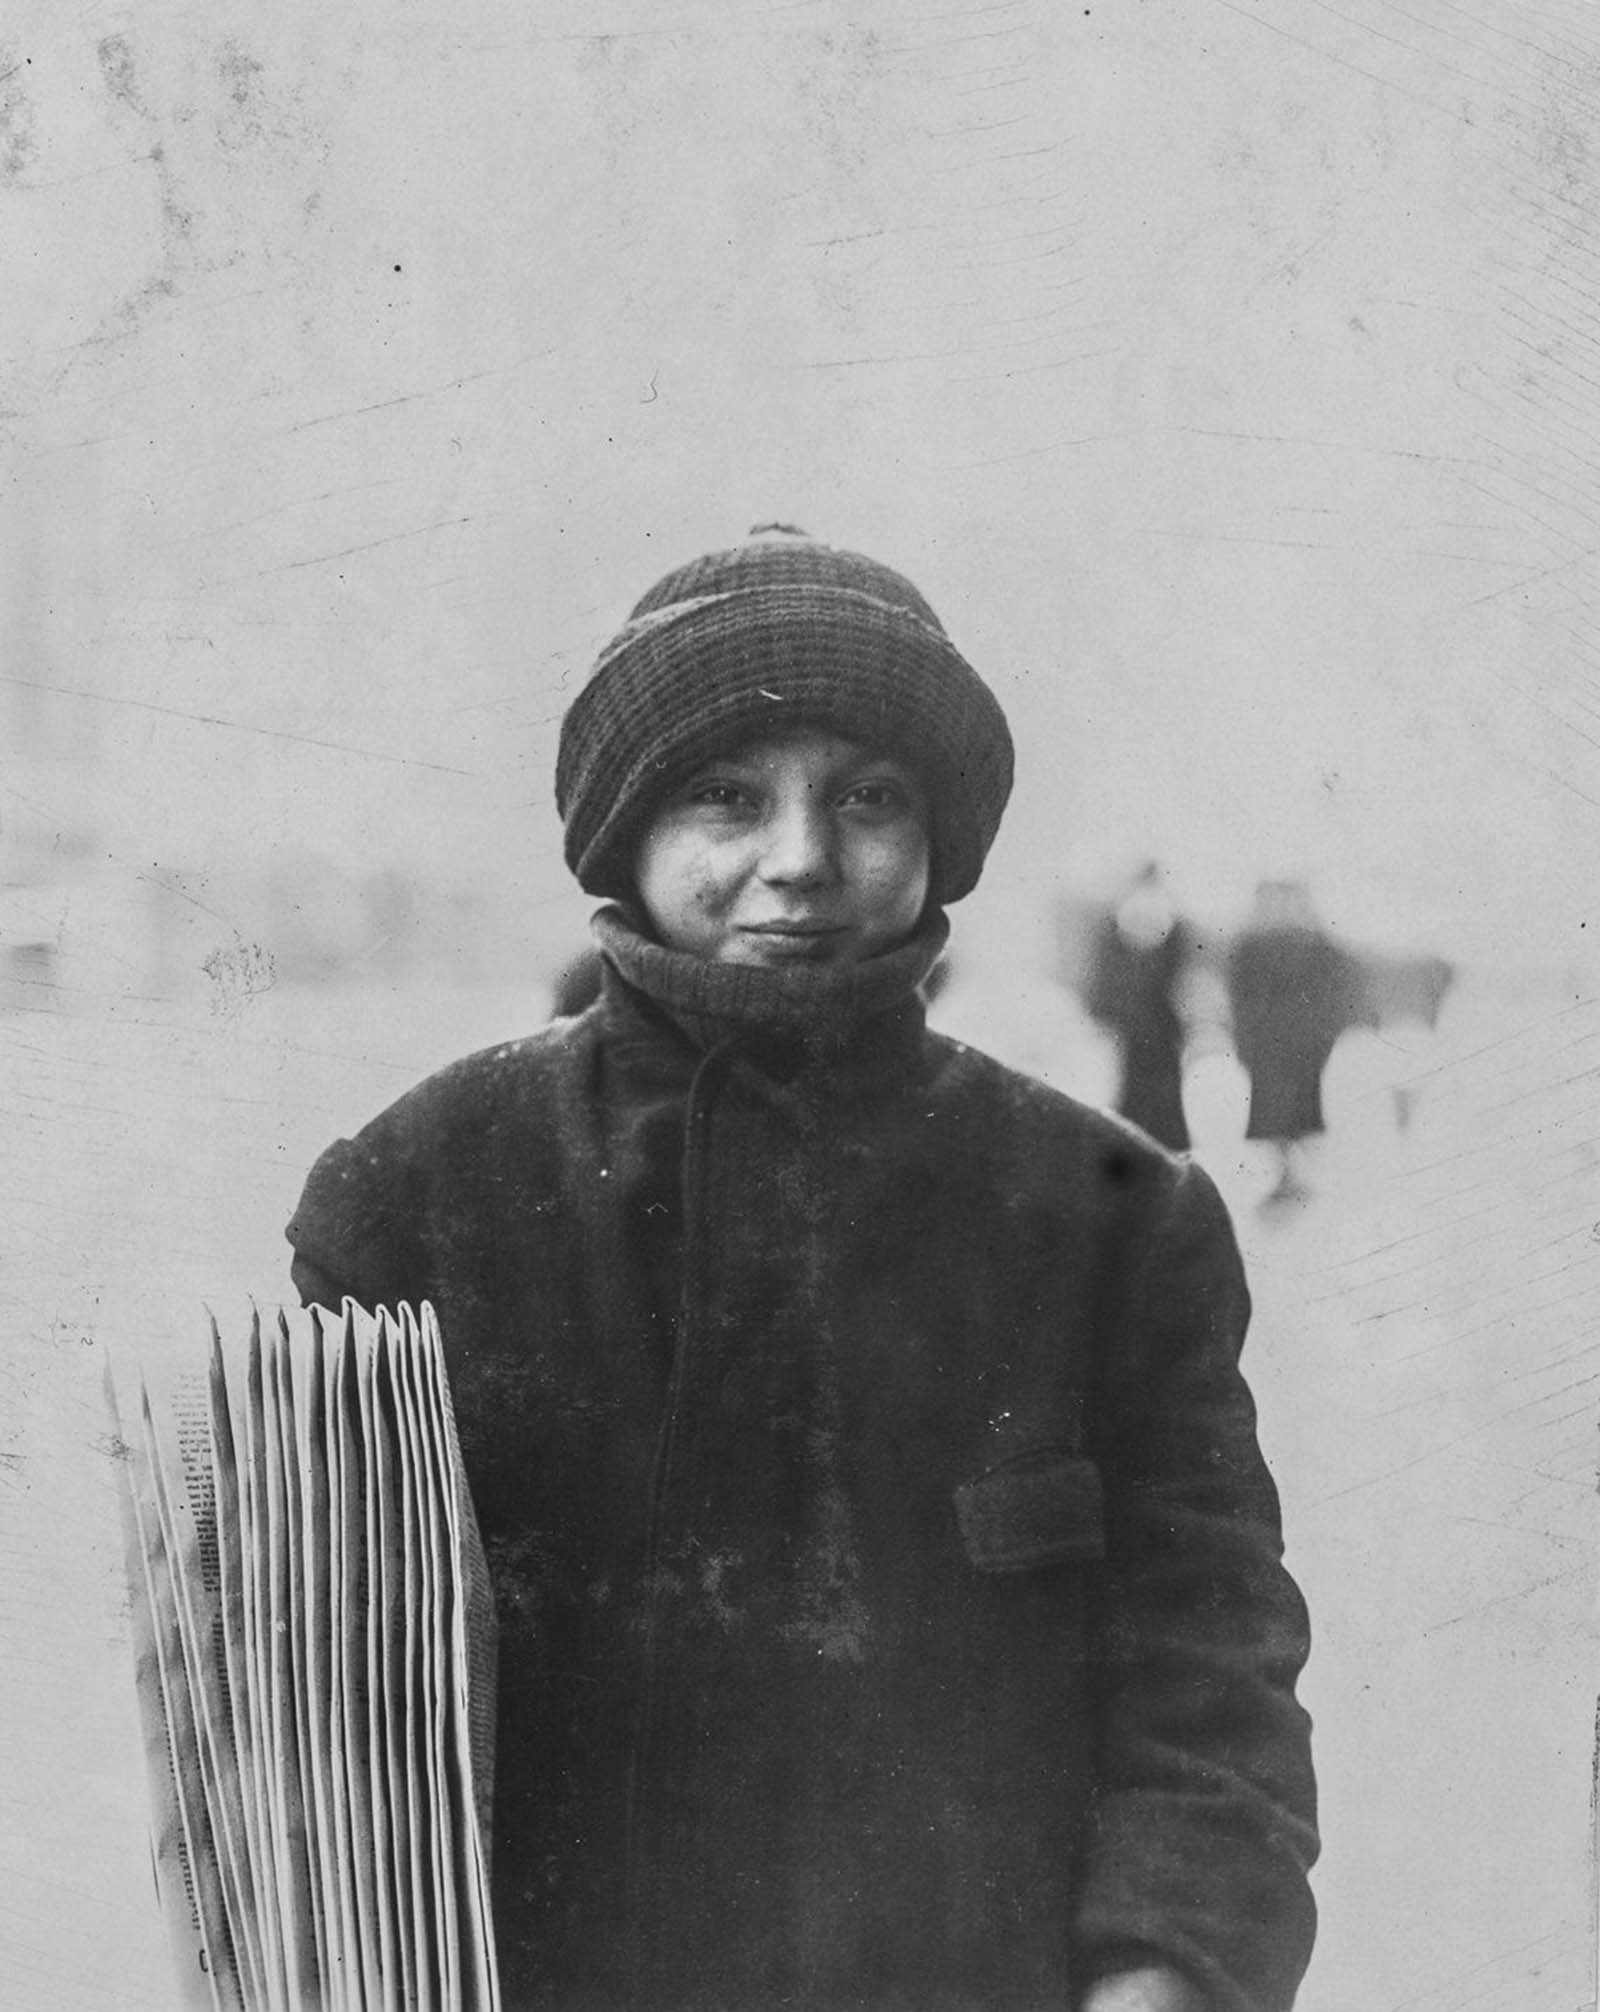 Newsie, selling before school, 7 a.m. Quito Scentola, 13-years-old, 20 Pennsylvania Avenue, been selling papers four years. Rochester, New York, 1910.